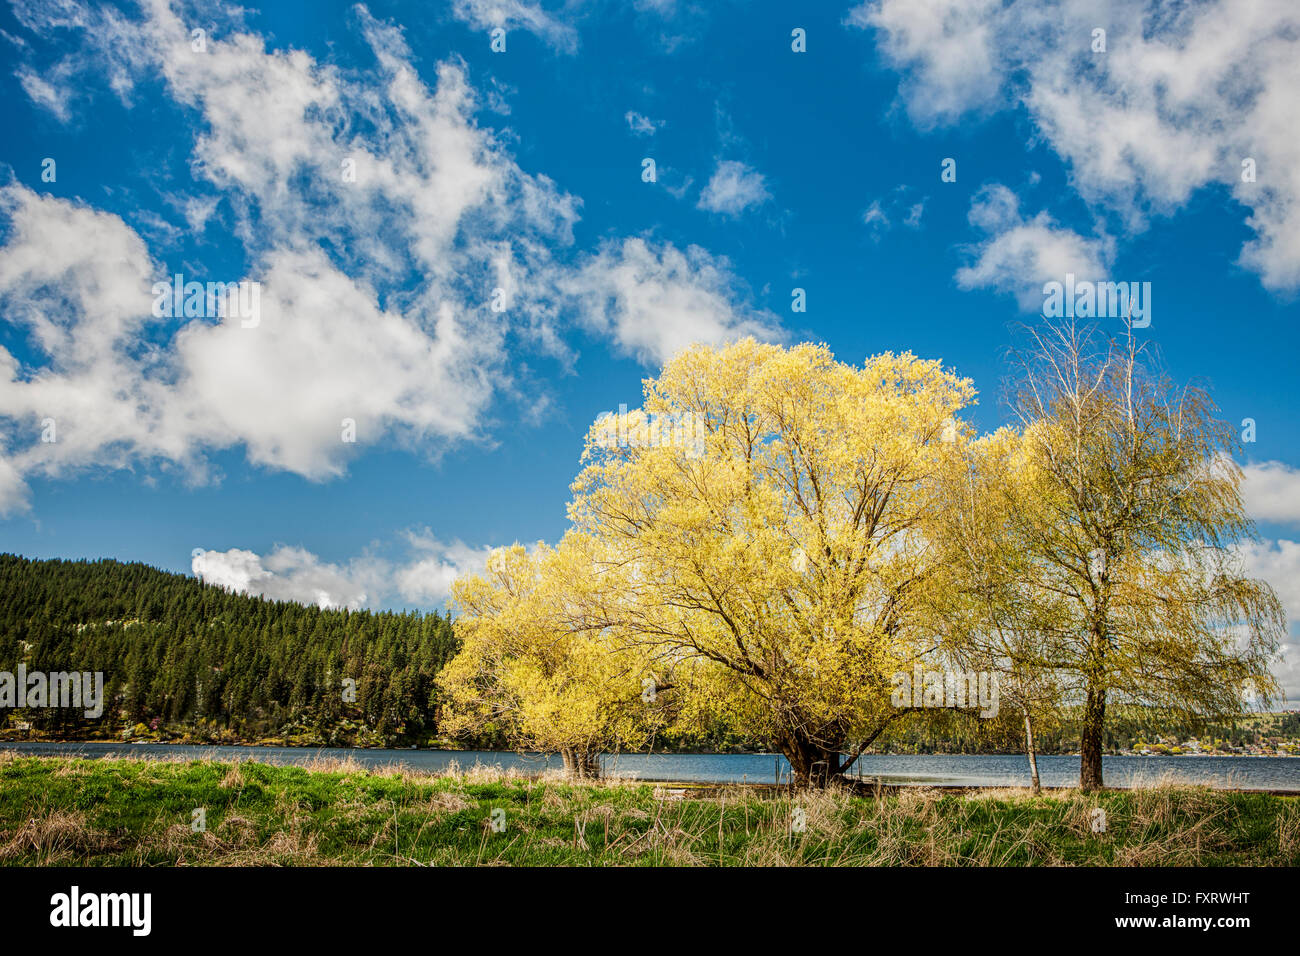 Beautiful yellow leaved trees under a blue sky at Liberty Lake in Washington. Stock Photo